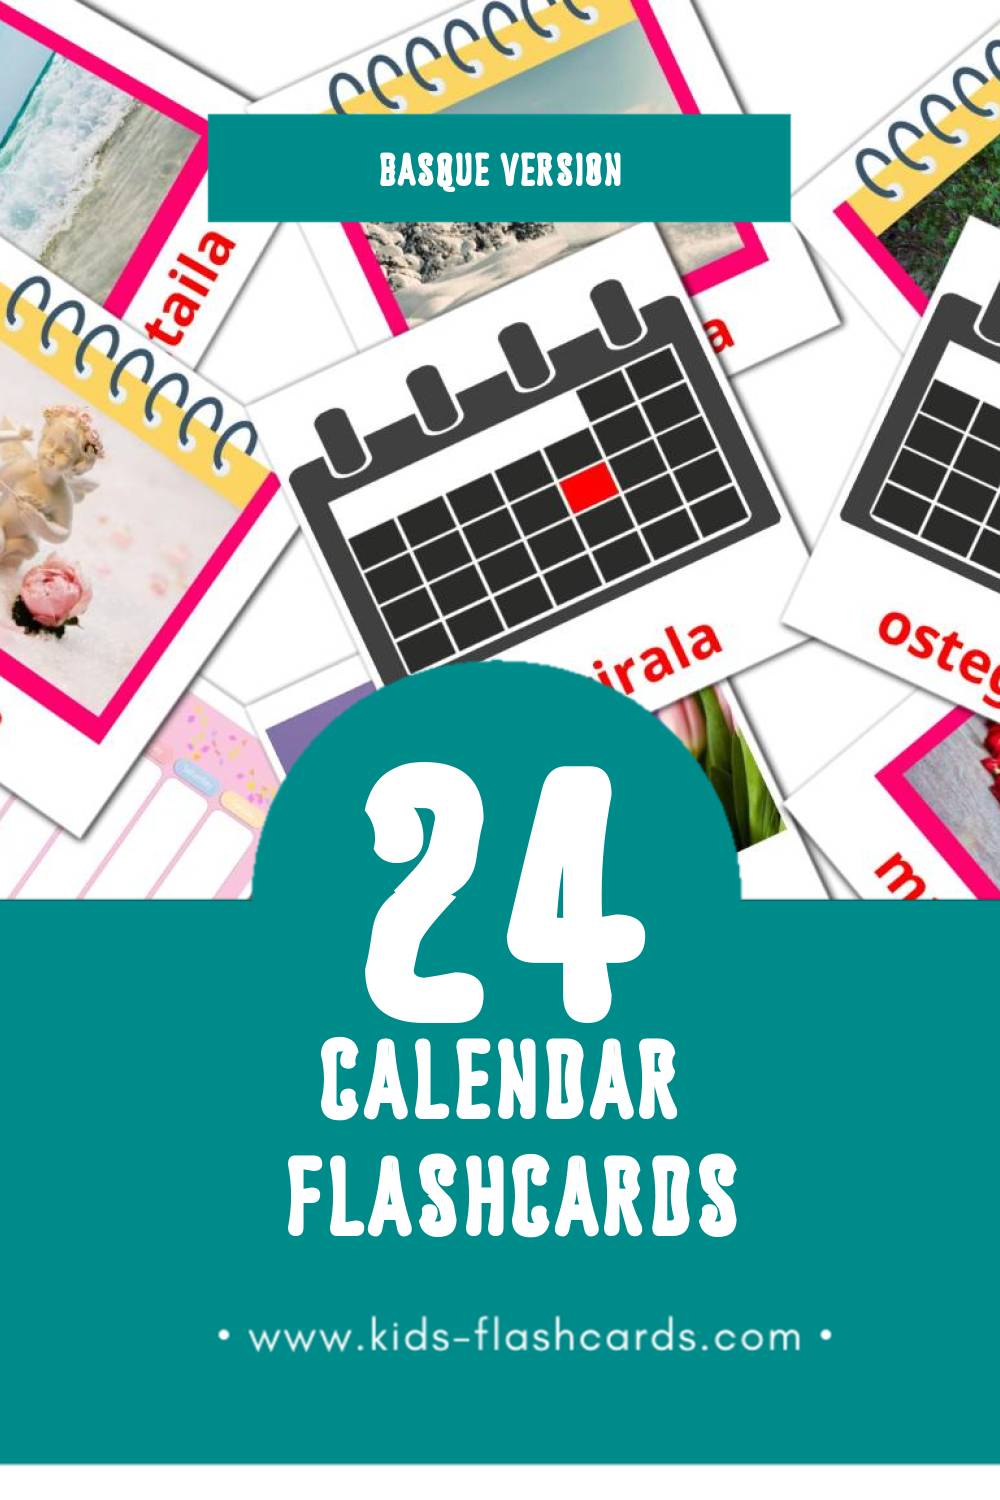 Visual Egutegia Flashcards for Toddlers (24 cards in Basque)